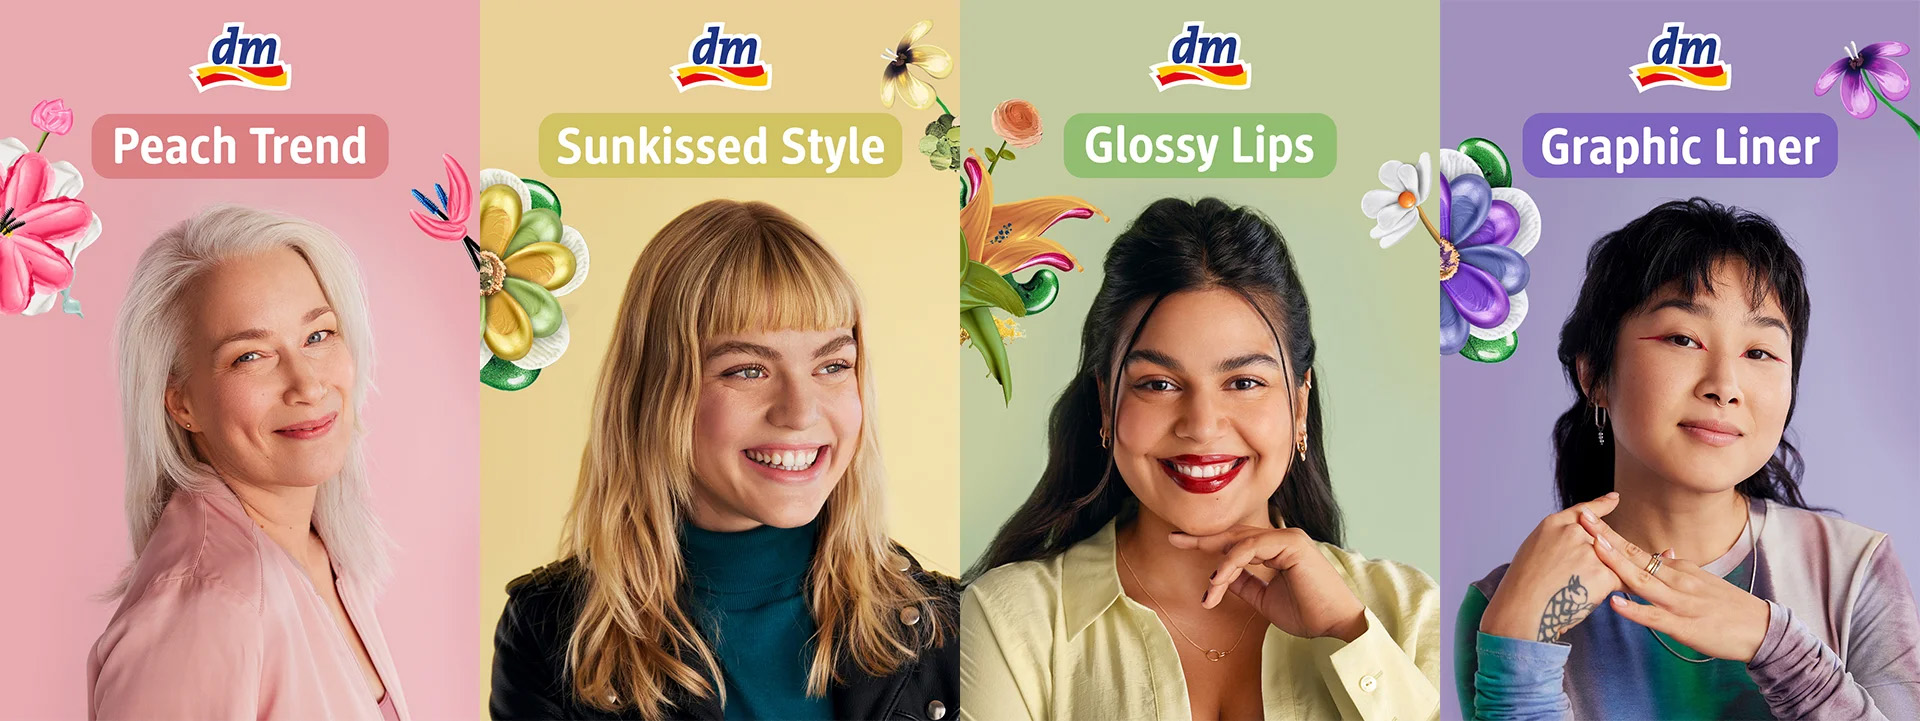 Four models of diverse ethnicities pose for a beauty campaign by dm drogerie